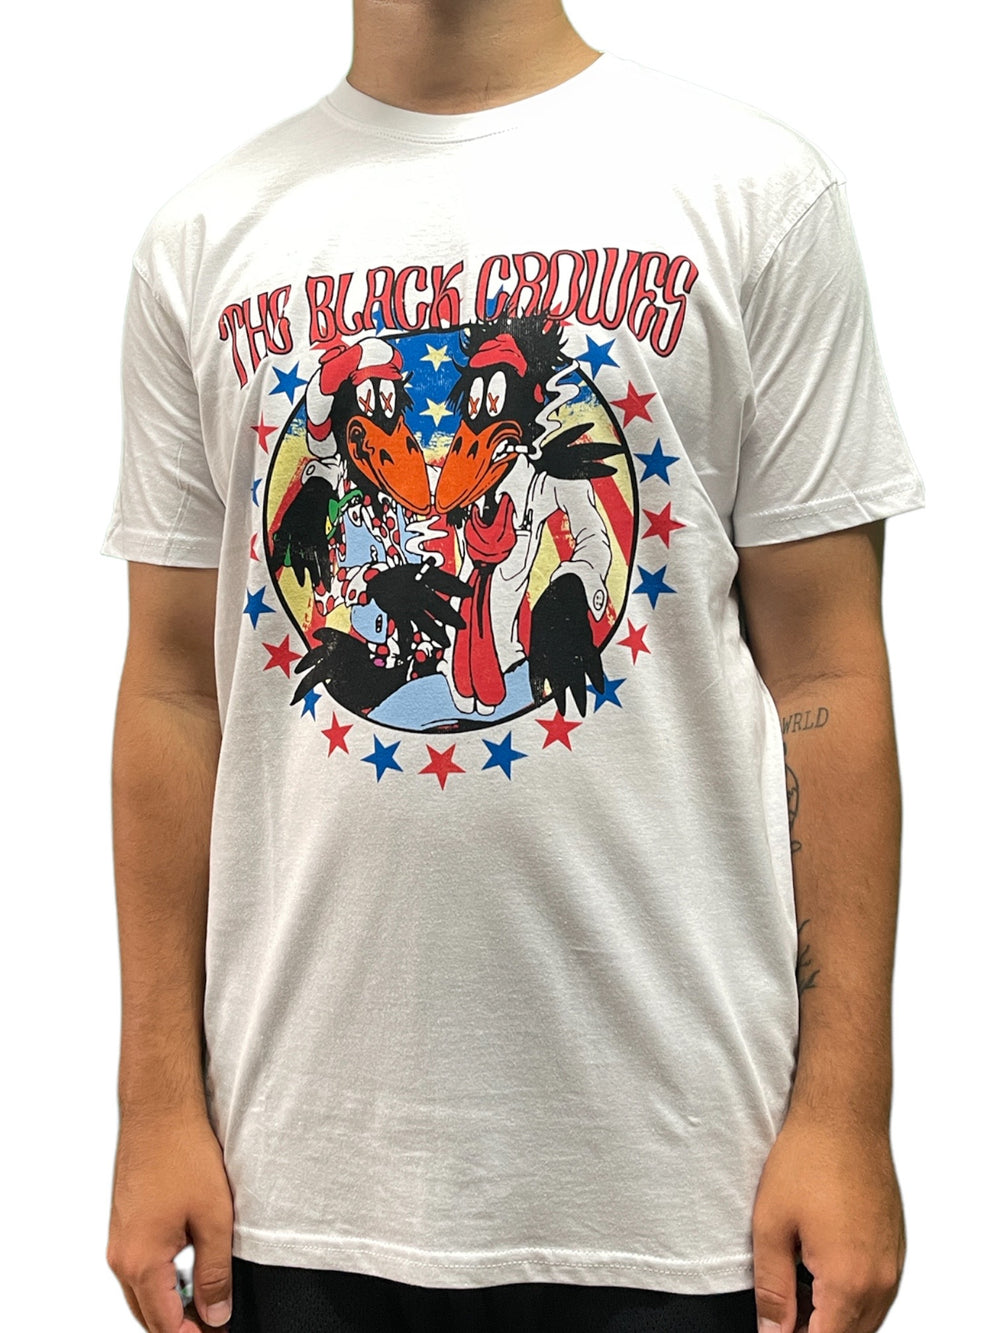 Black Crowes AMERICANA Official Unisex T Shirt Brand New Various Sizes